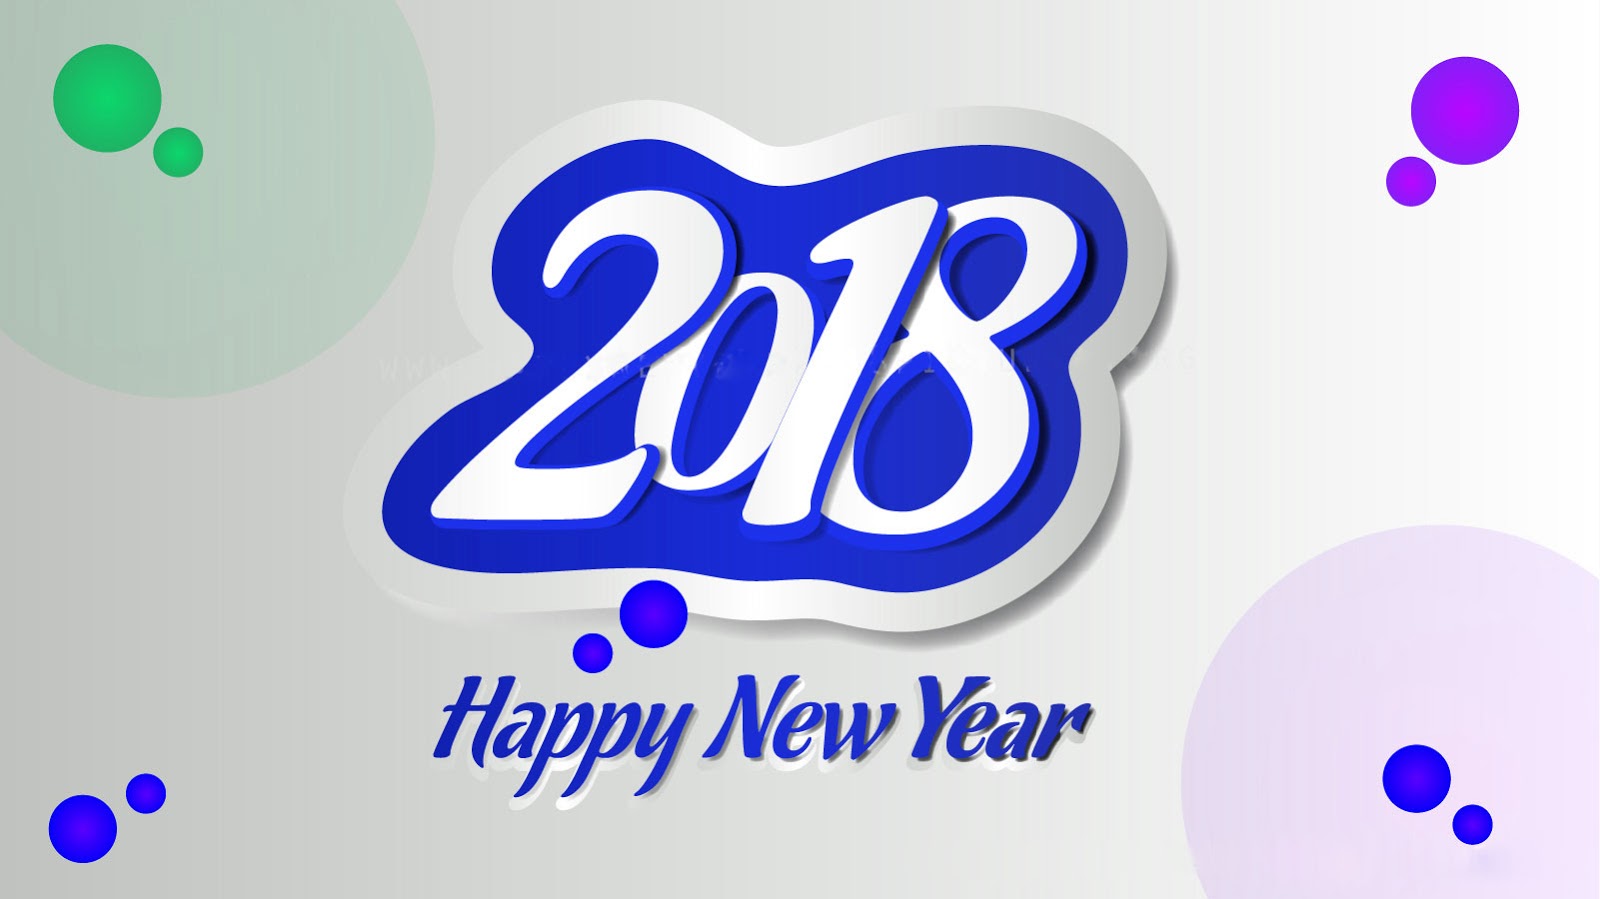 [500+] Happy New Year 2018 HD Wallpapers, Images, Pictures 